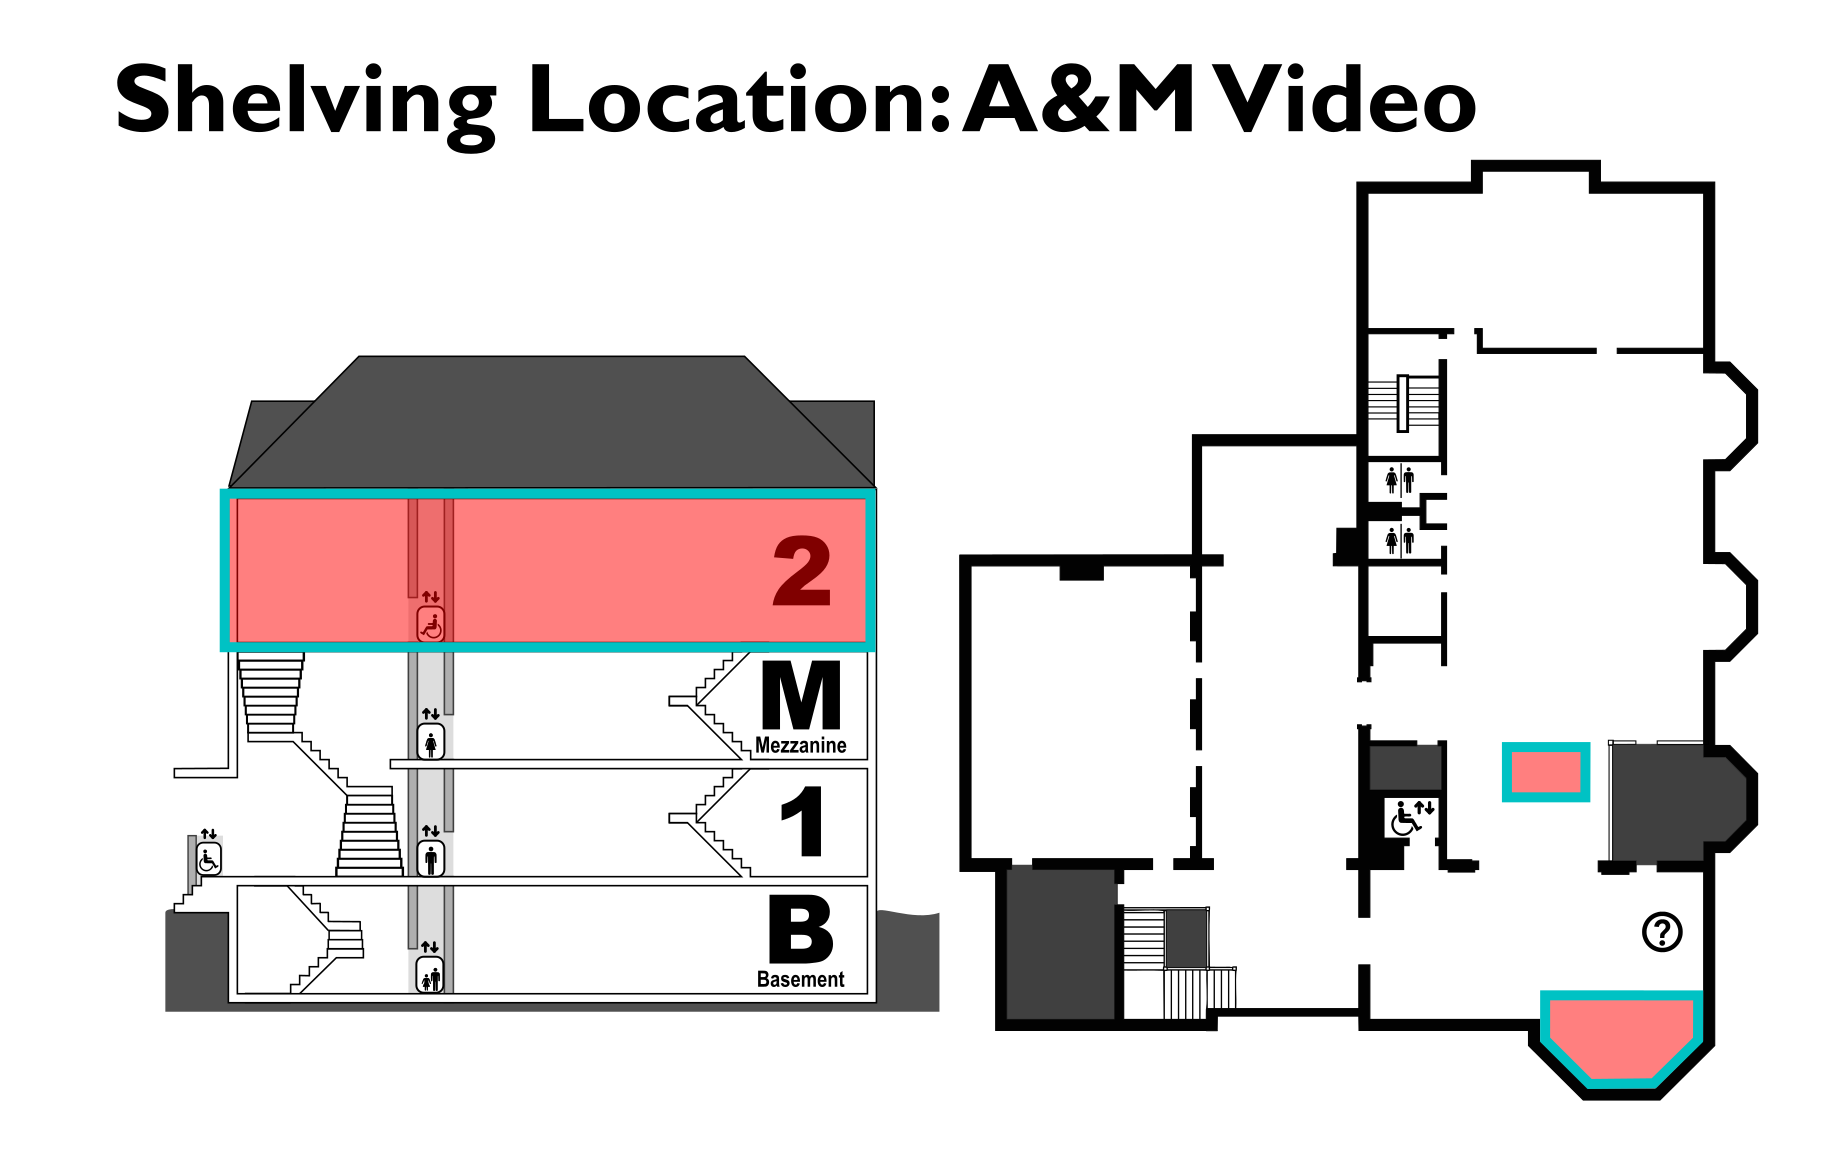 map showing the location of the A&M Video shelving location